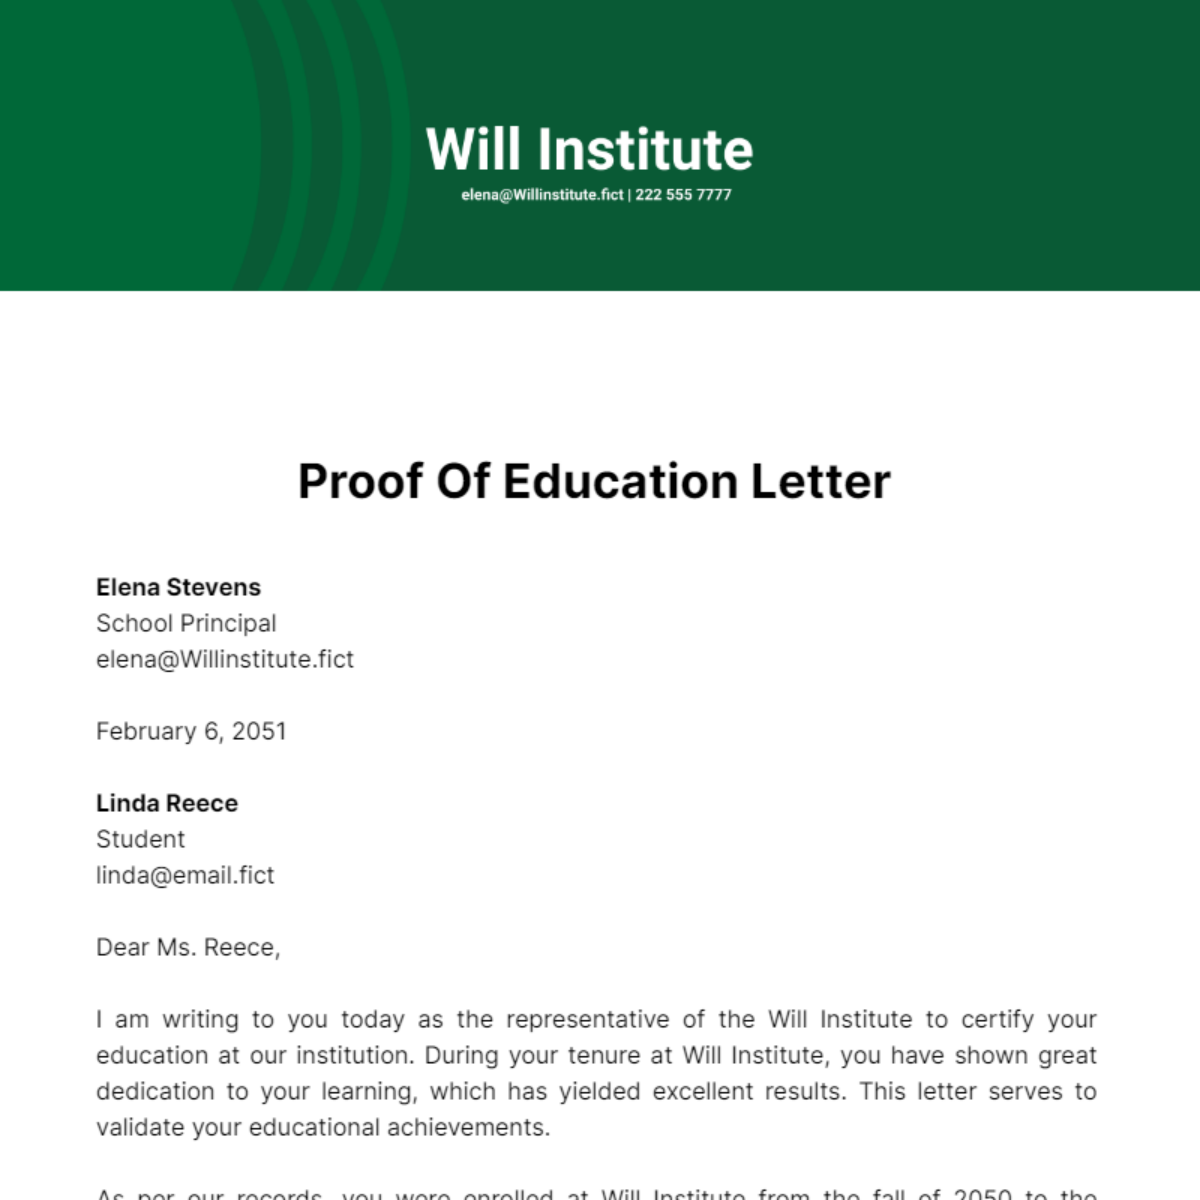 Proof of Education Letter Template